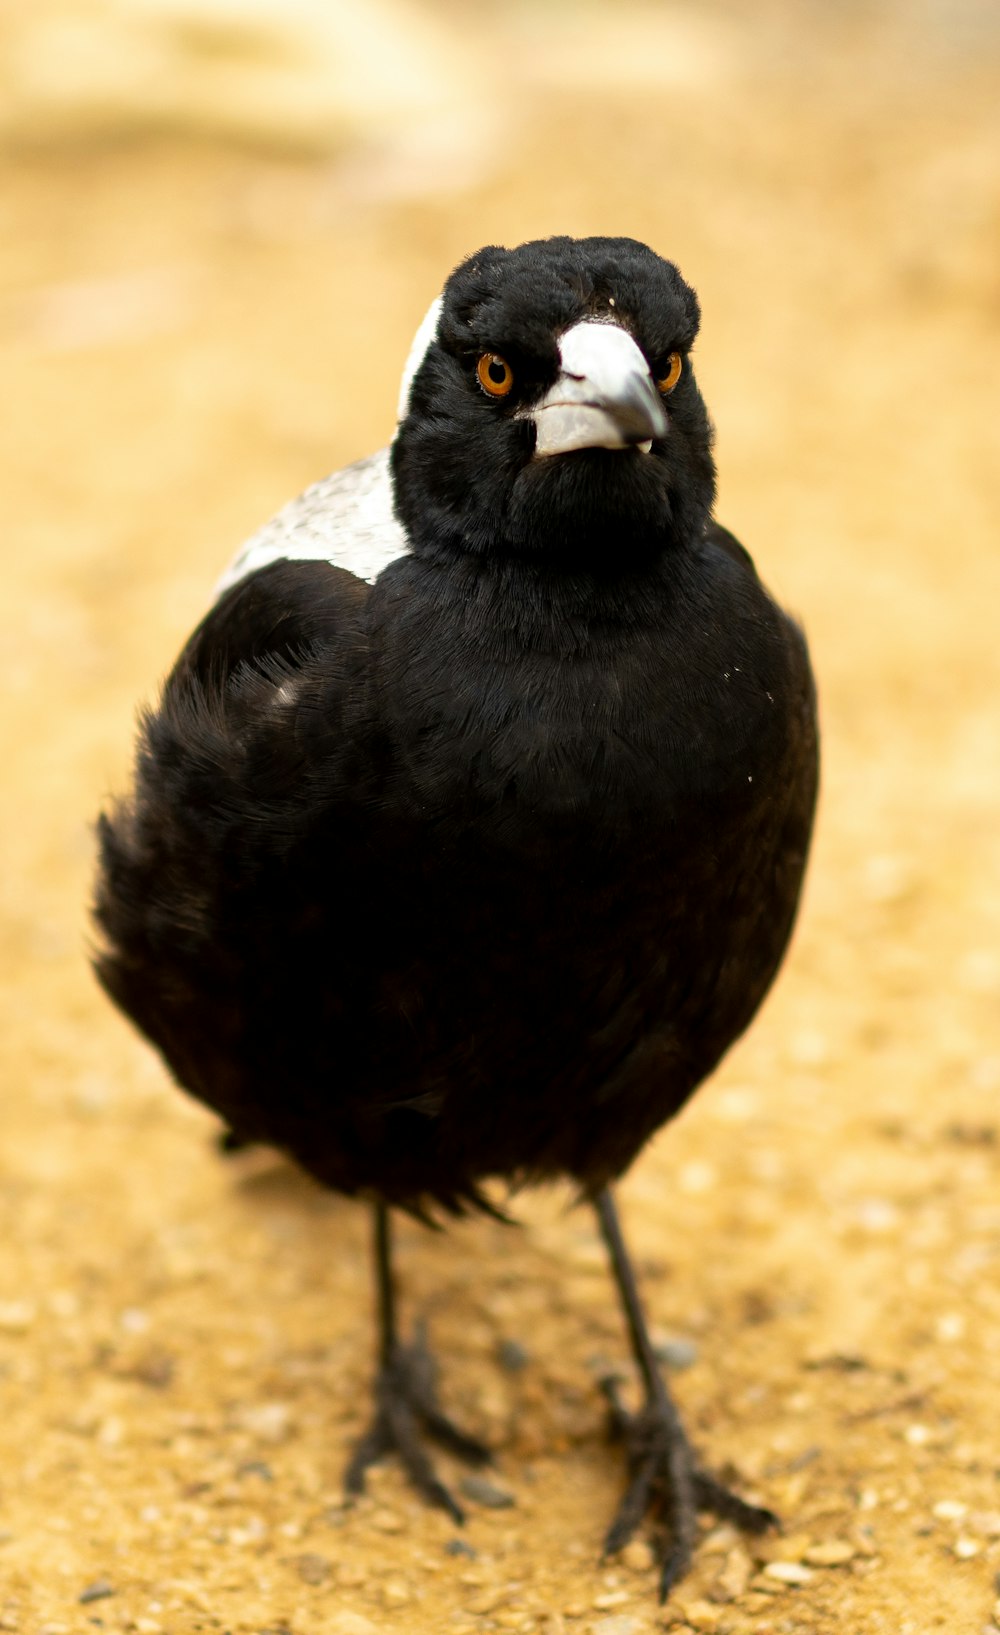 a black and white bird standing on the ground